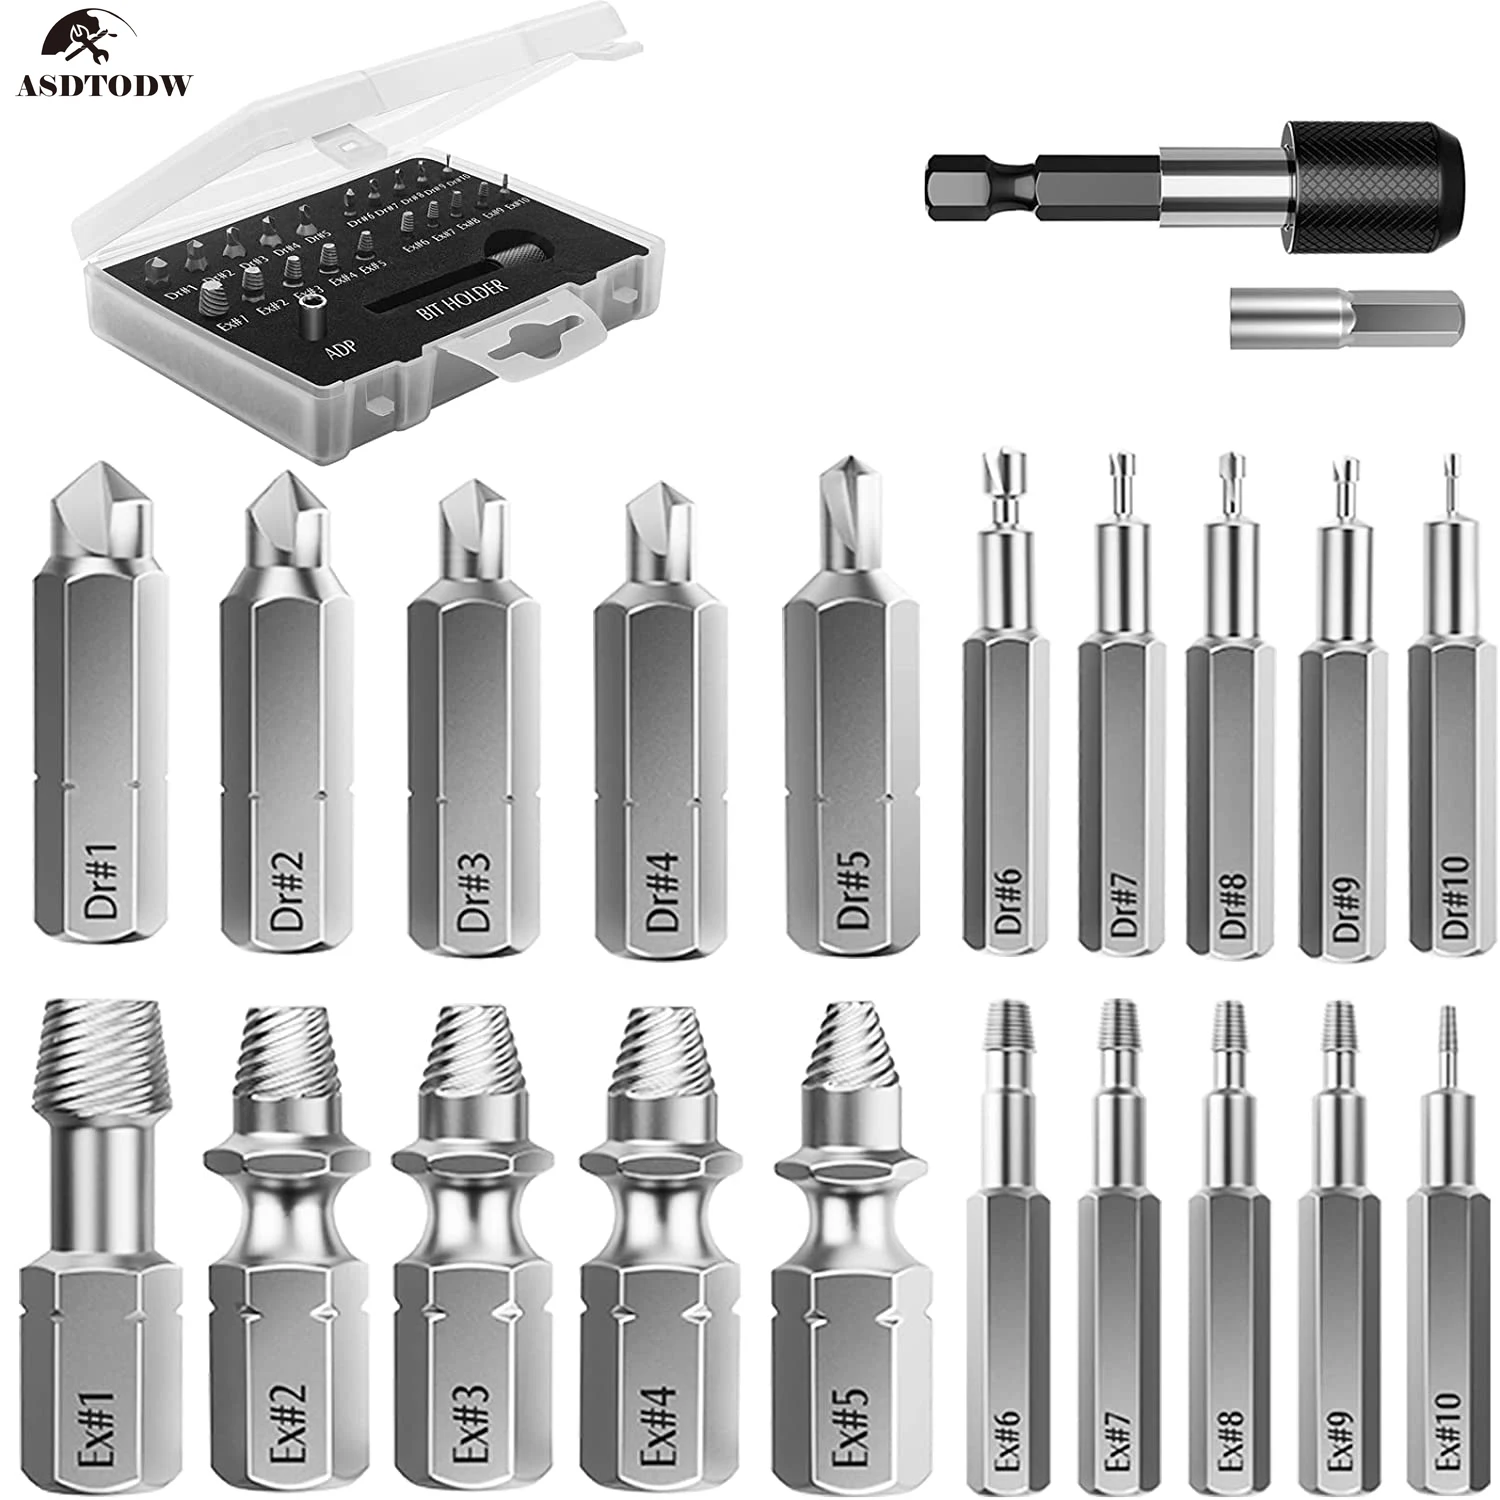 GetUSCart- Damaged Screw Extractor Set, HSS 4341, Upgrade 4 PCS Bolt  Extractor Kit, Easily Remove Stripped and Broken Screws